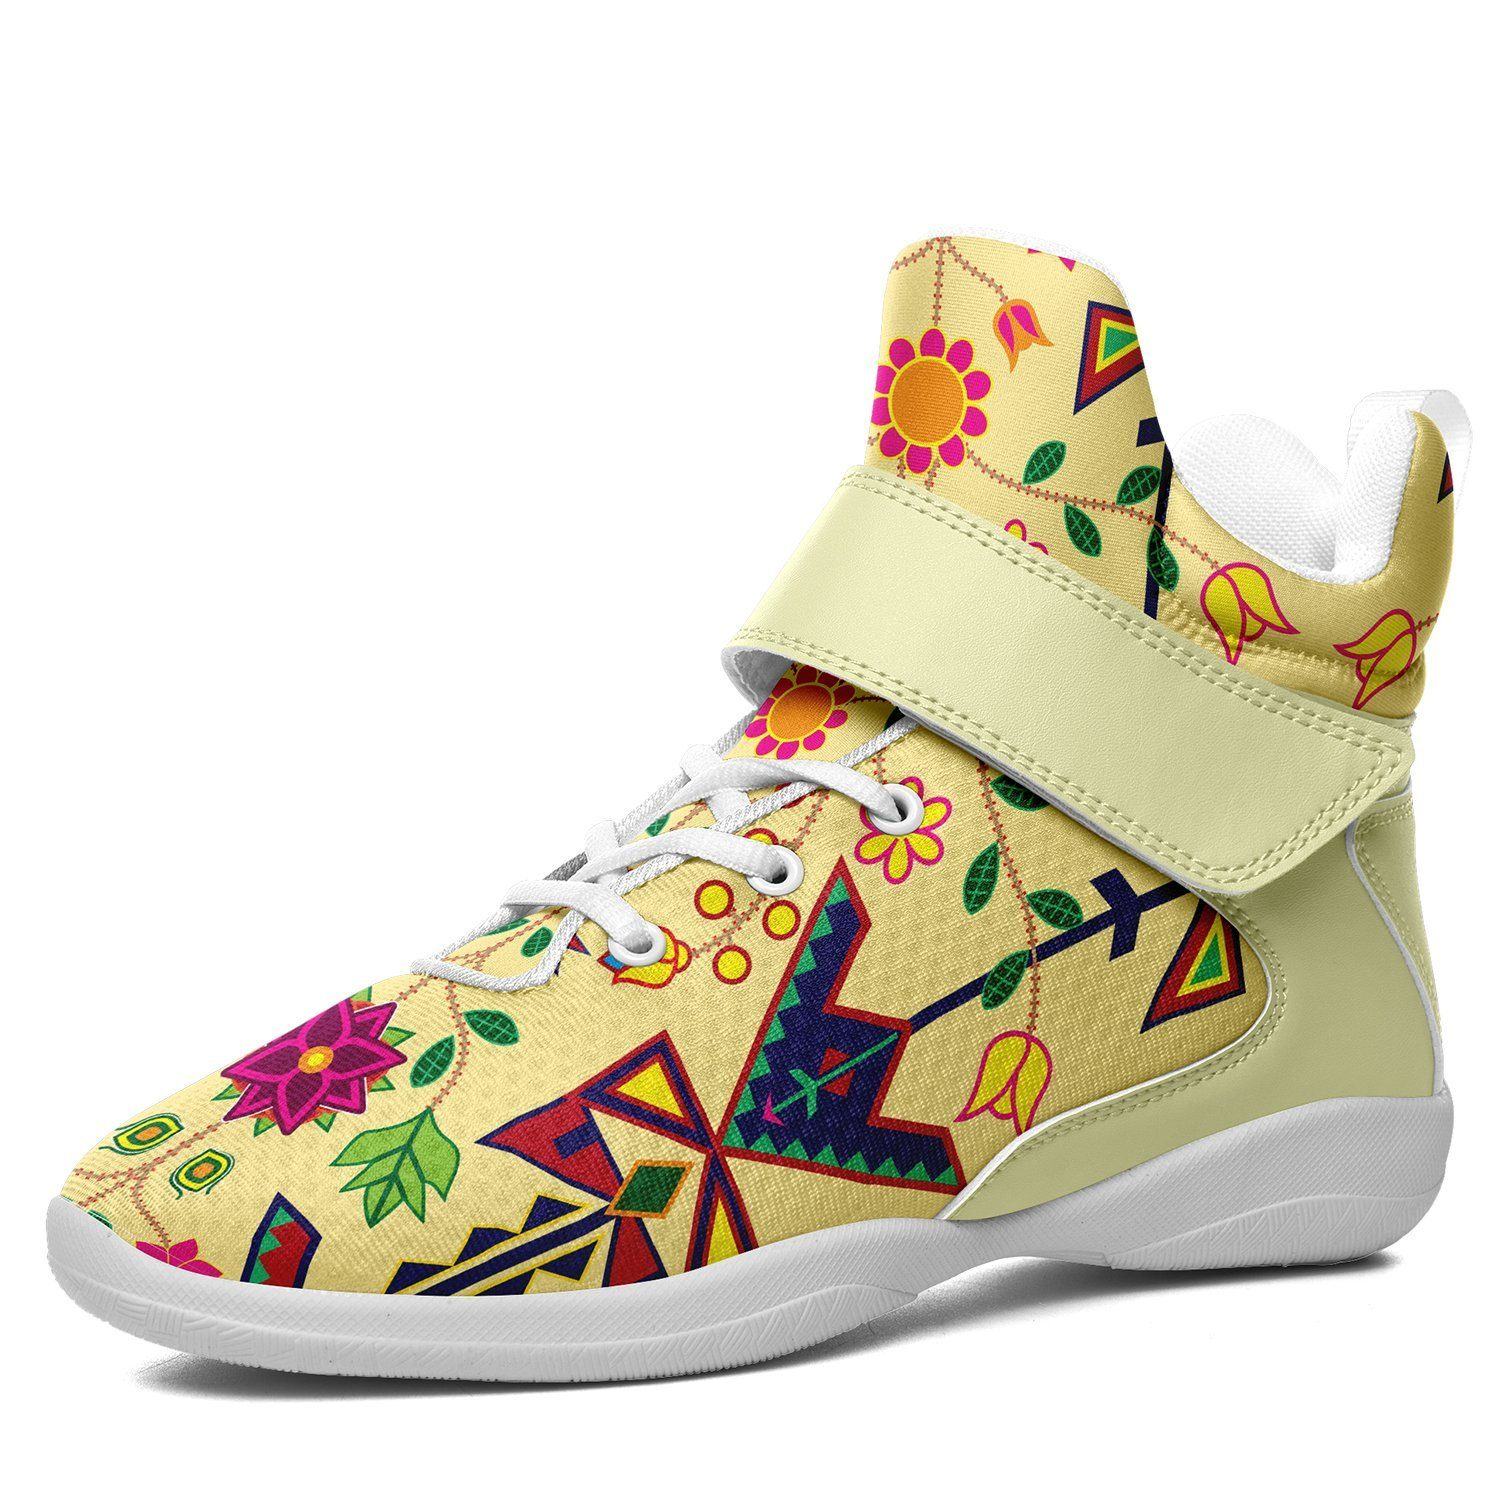 Geometric Floral Spring Vanilla Ipottaa Basketball / Sport High Top Shoes - White Sole 49 Dzine US Men 7 / EUR 40 White Sole with Light Yellow Strap 